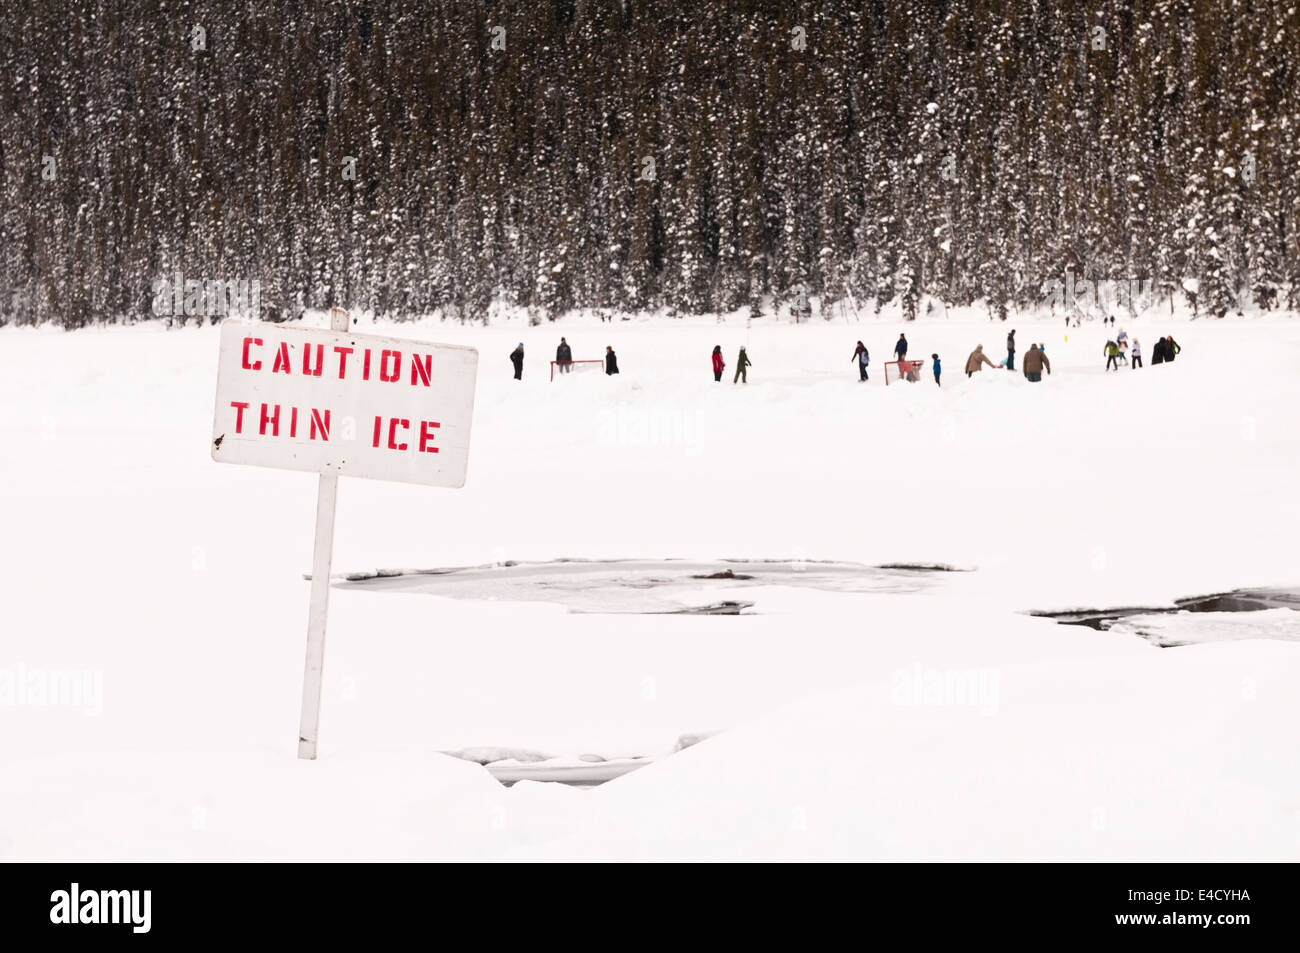 Caution Thin Ice, sign, with people in the background, Lake Louise, Banff National Park, Alberta, Canada Stock Photo